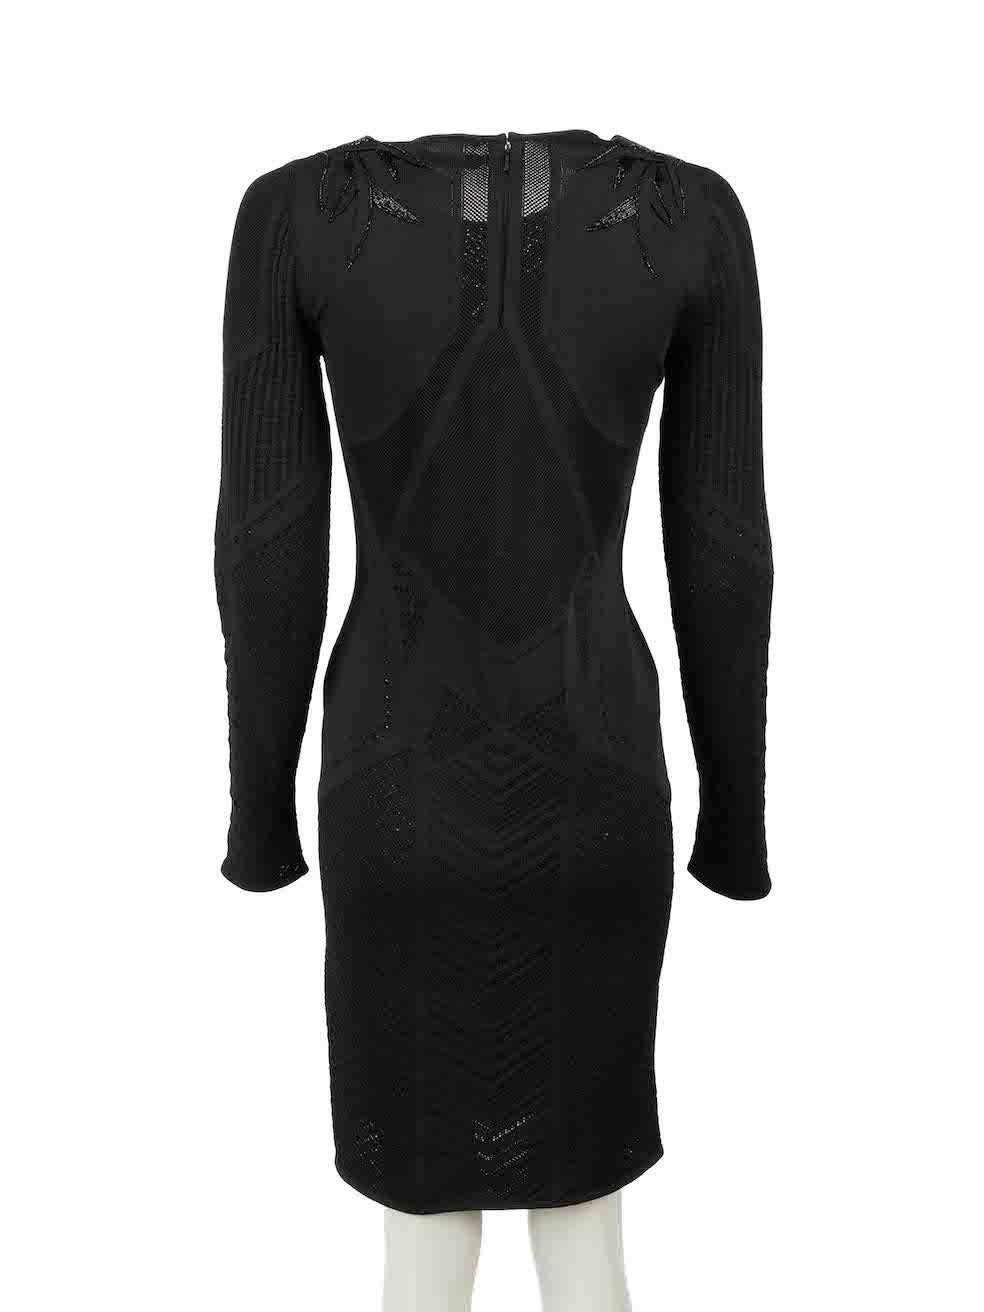 CONDITION is Never worn, with tags. No visible wear to dress is evident beside a number of small pulls to the weave through the body on this new Roberto Cavalli designer resale item.
 
 Details
 Black
 Viscose
 Knee length dress
 Knit lace dress
